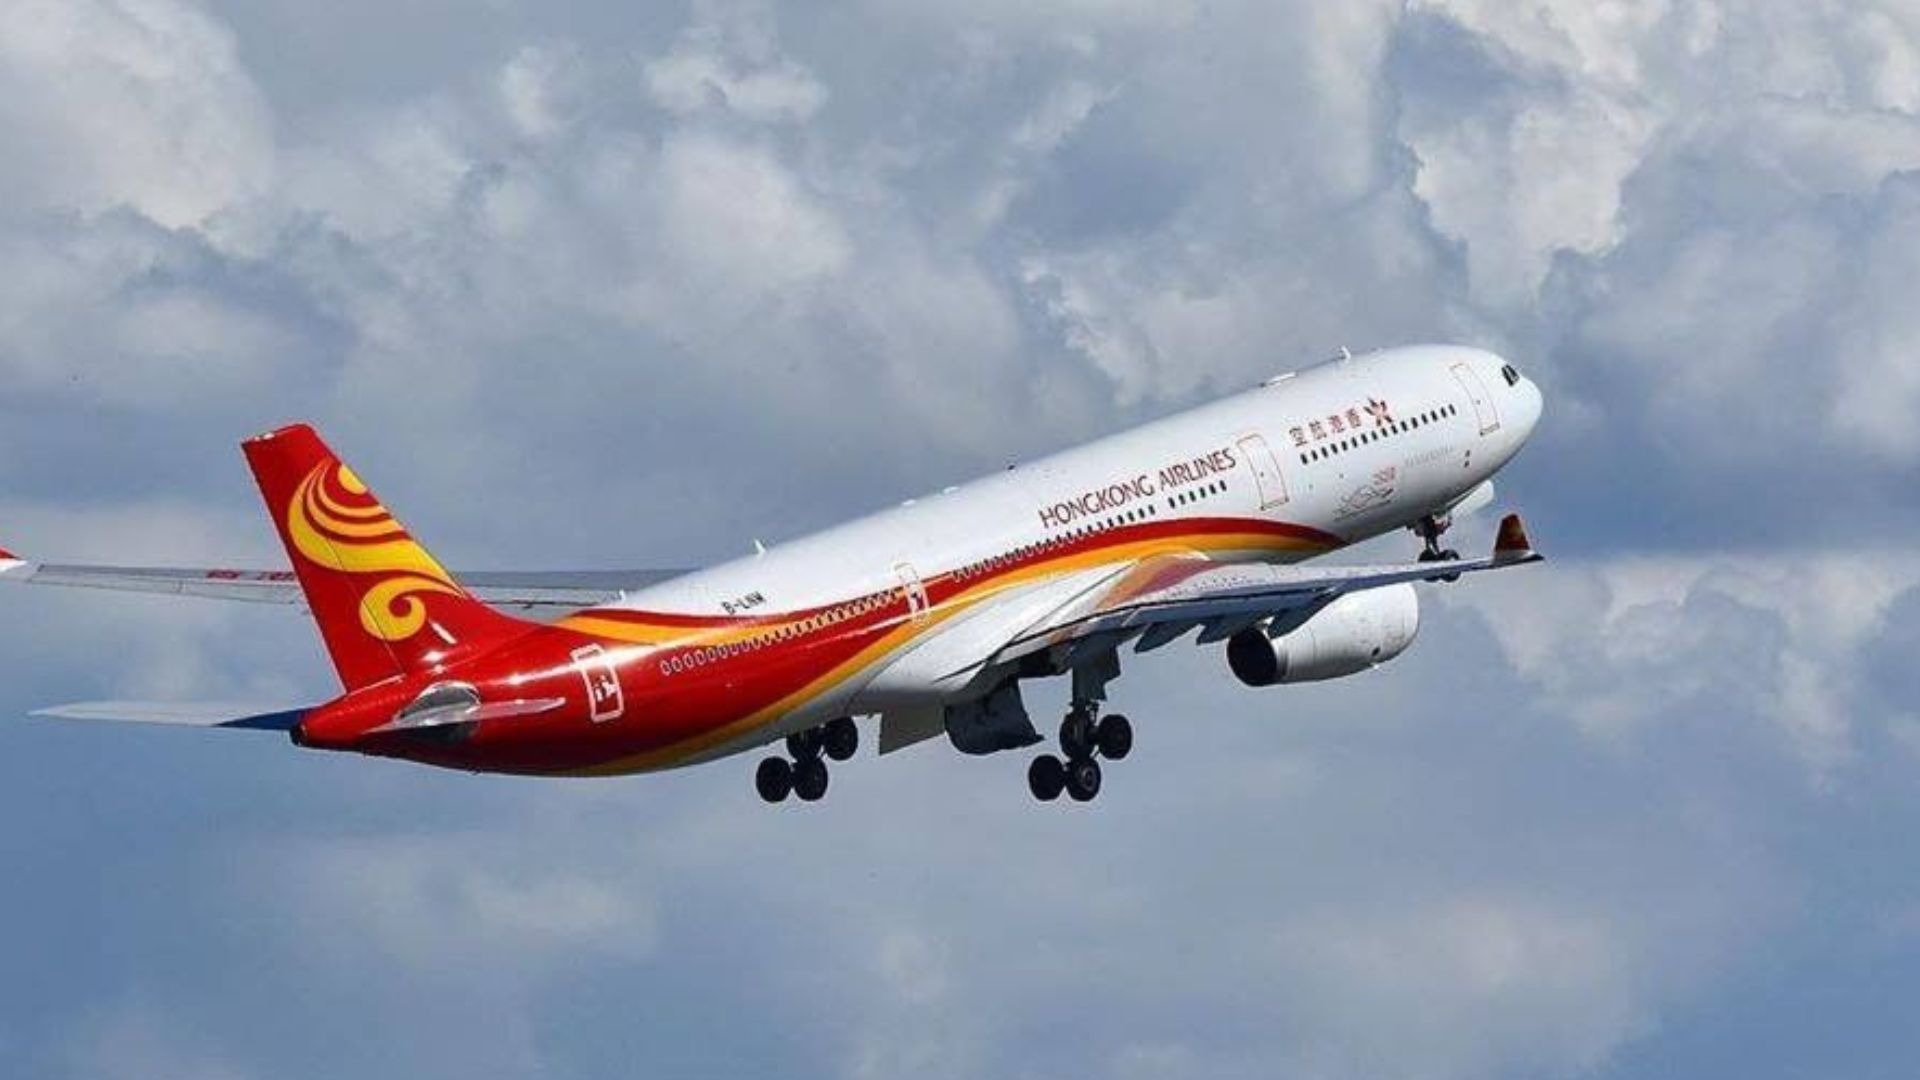 Hong Kong airlines frequent flyer program